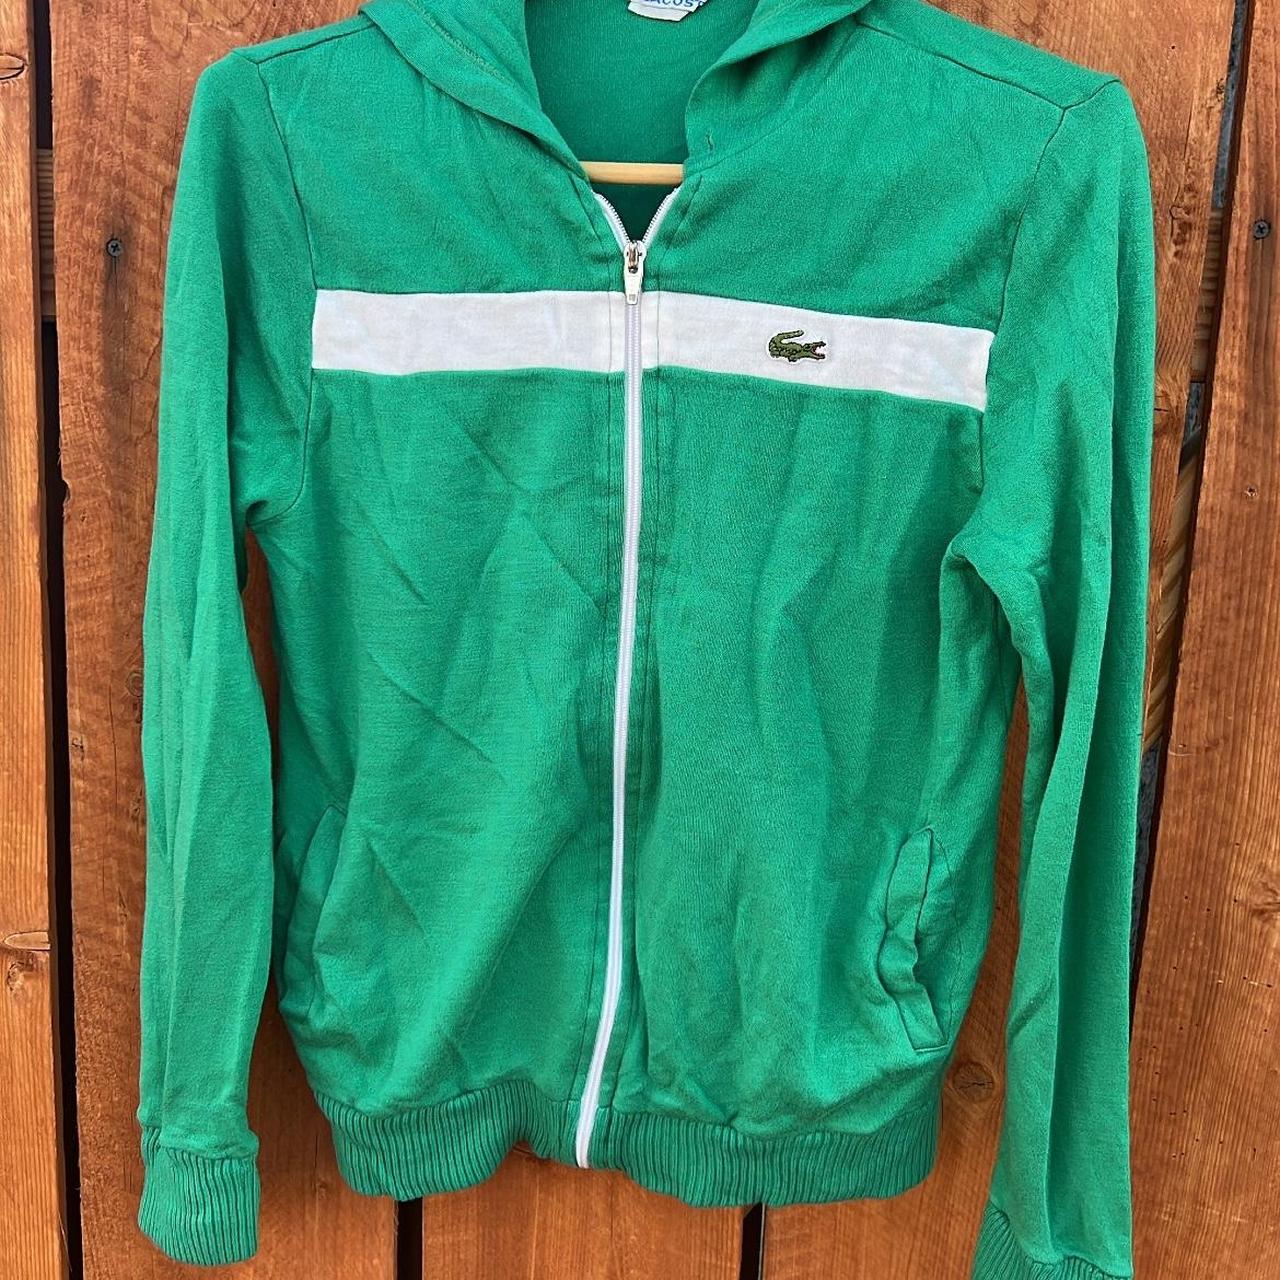 Lacoste Women's Green and White Jacket | Depop